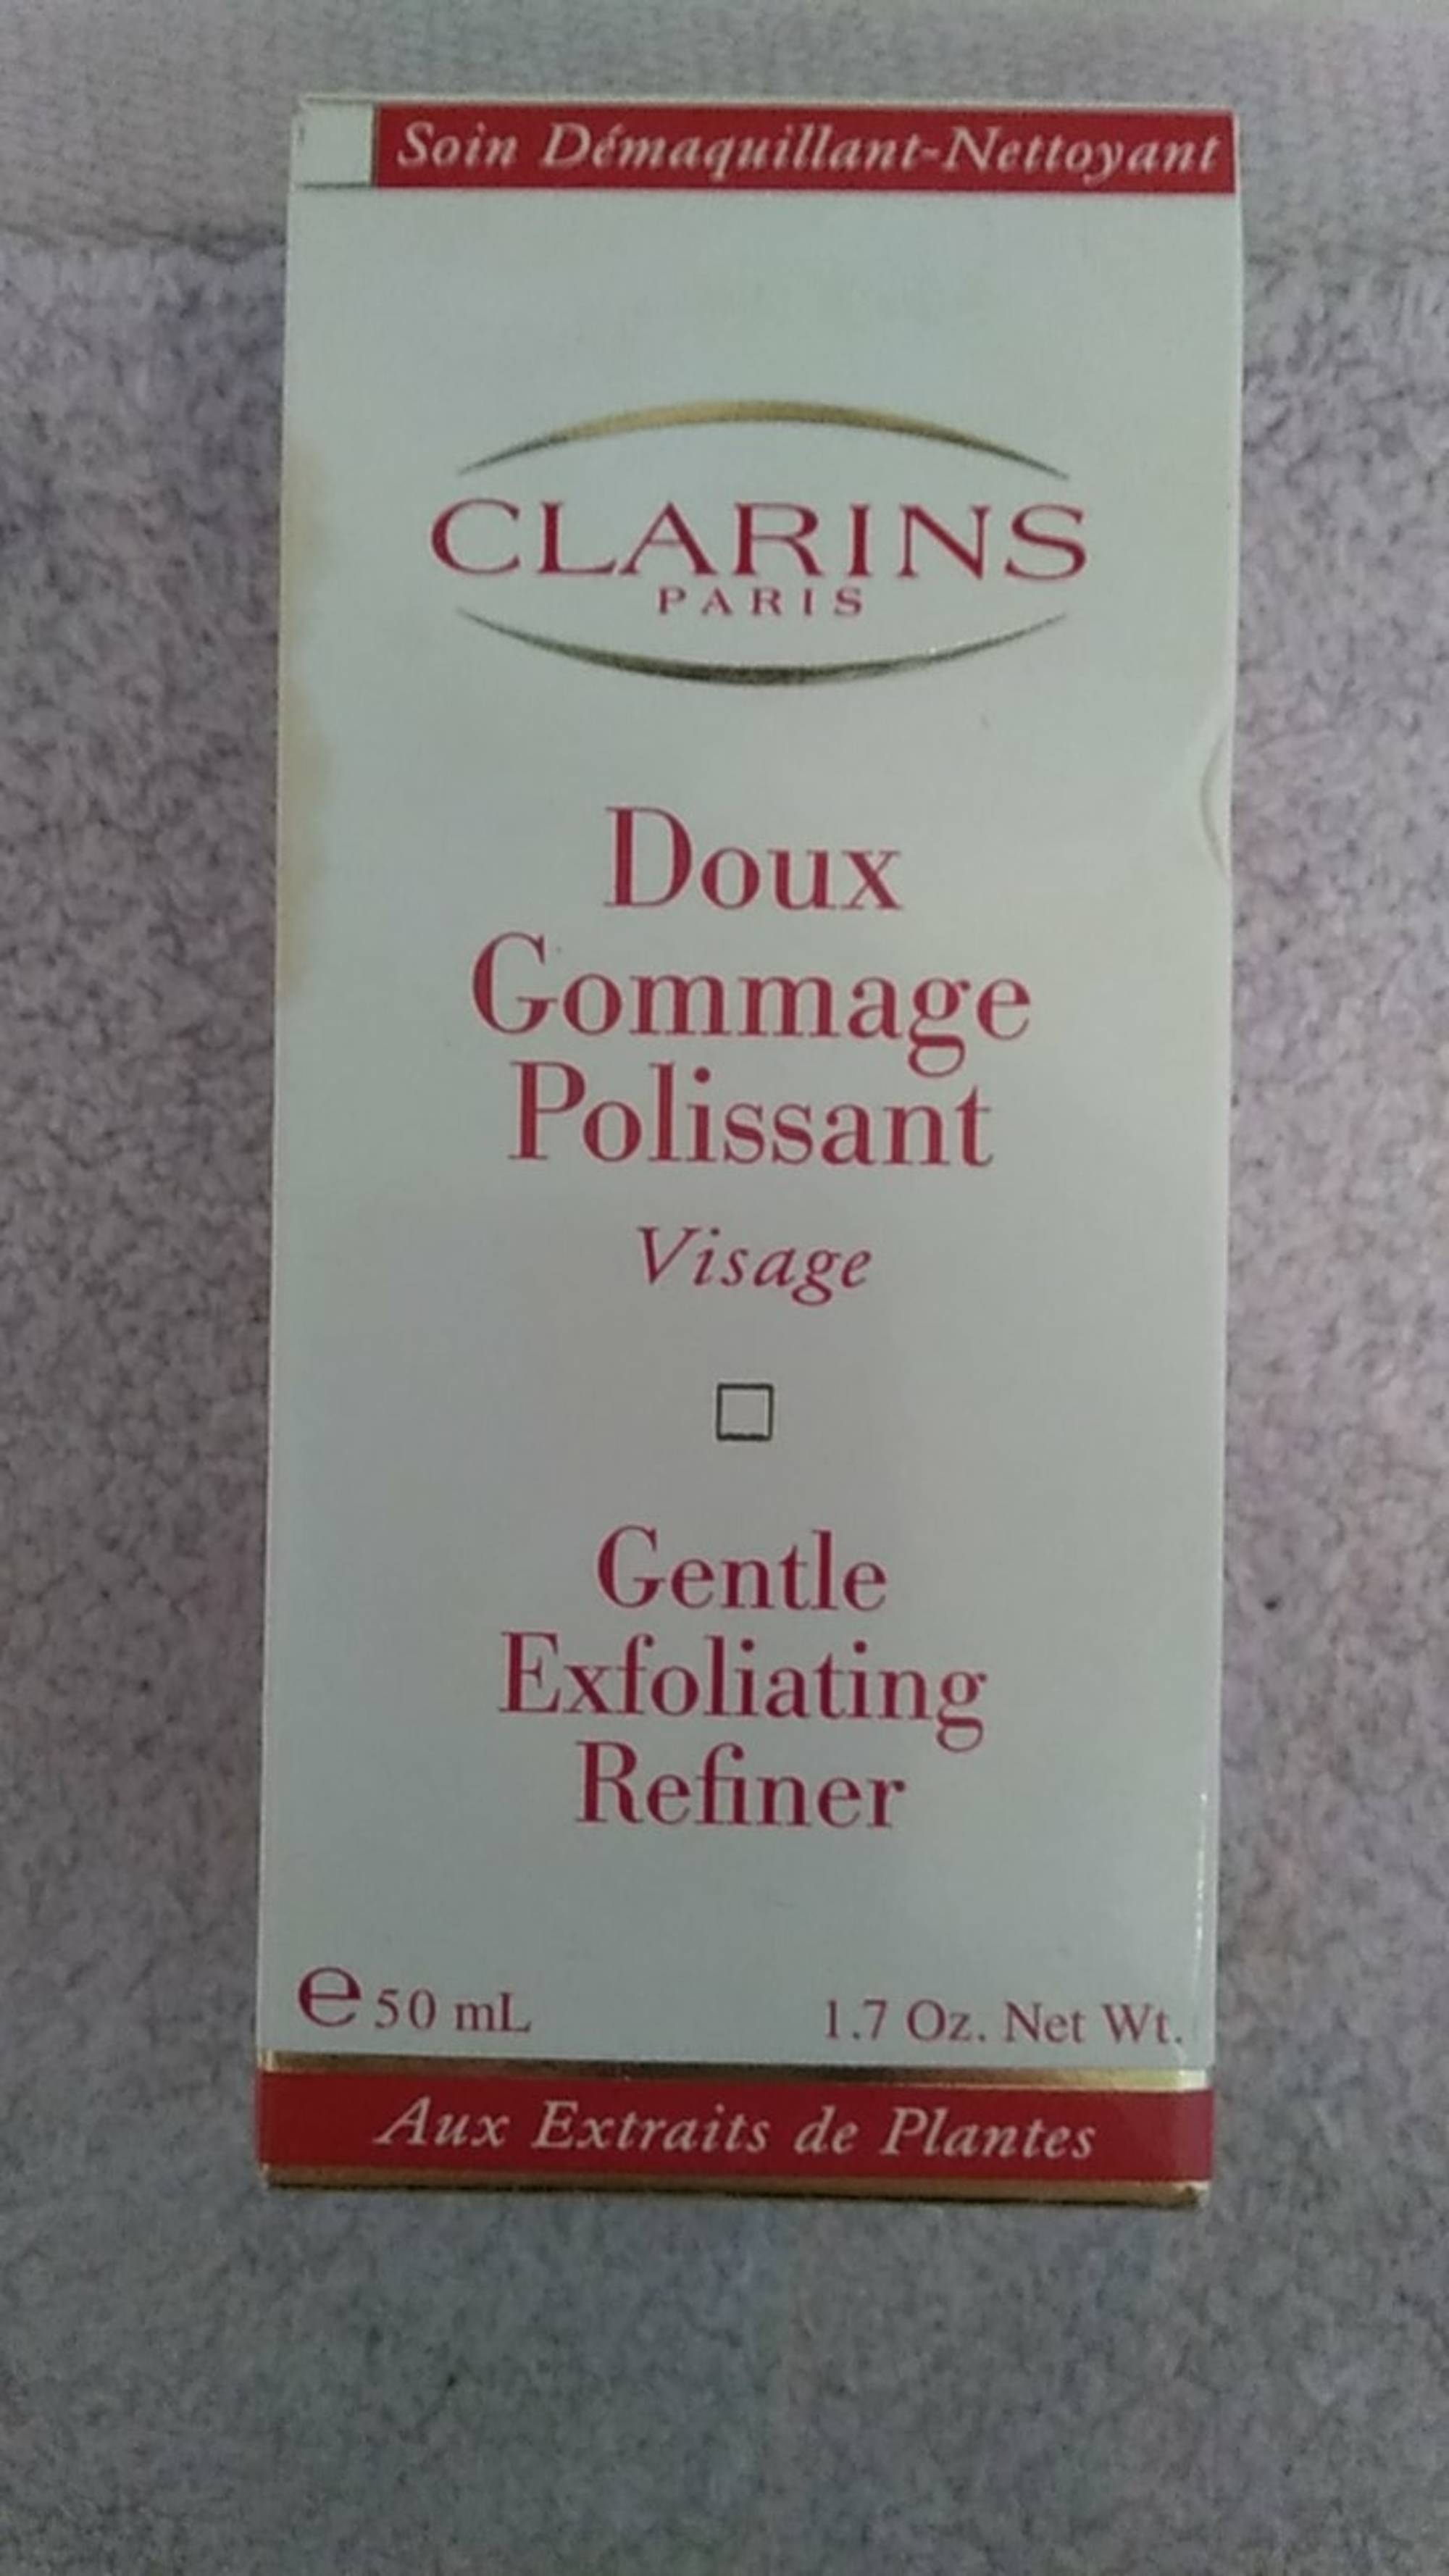 CLARINS - Doux gommage polissant